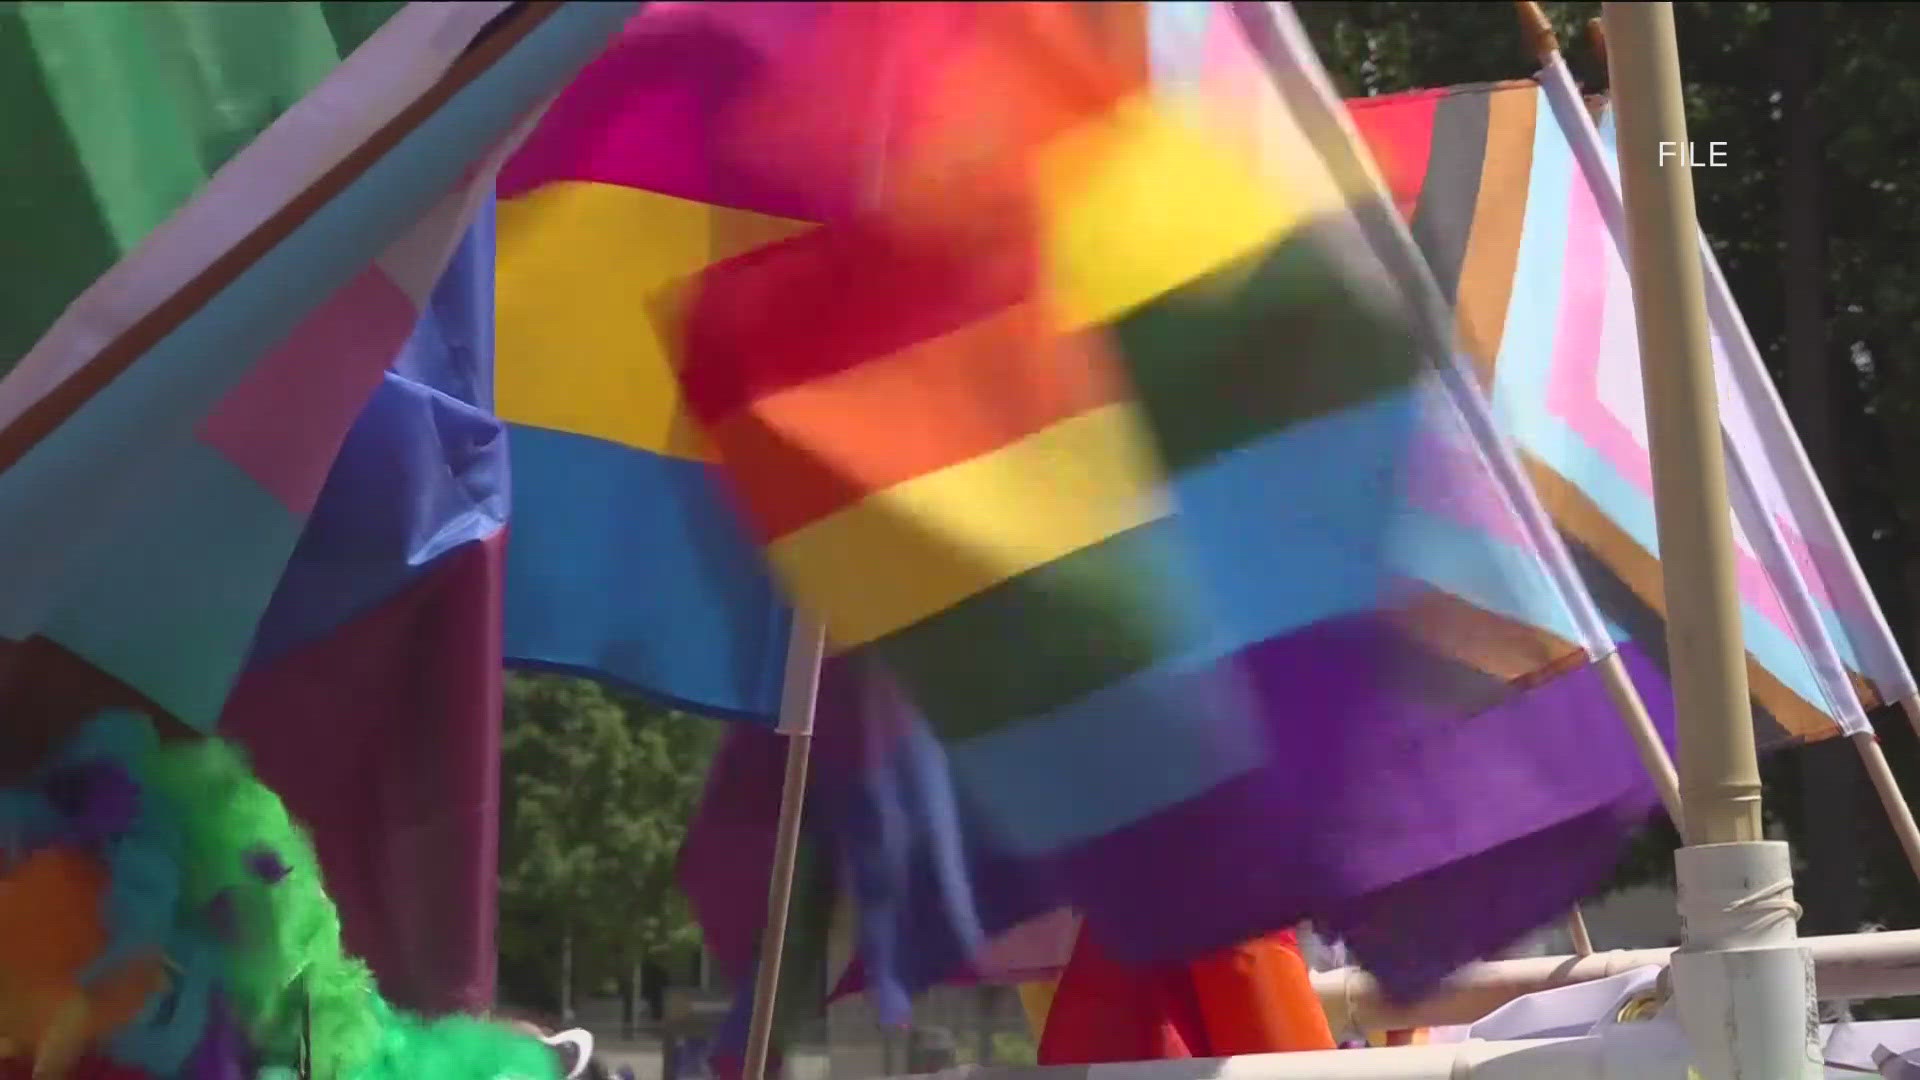 The City of Fayetteville is preparing as 35,000 people are expected at this year's Northwest Arkansas Pride event.